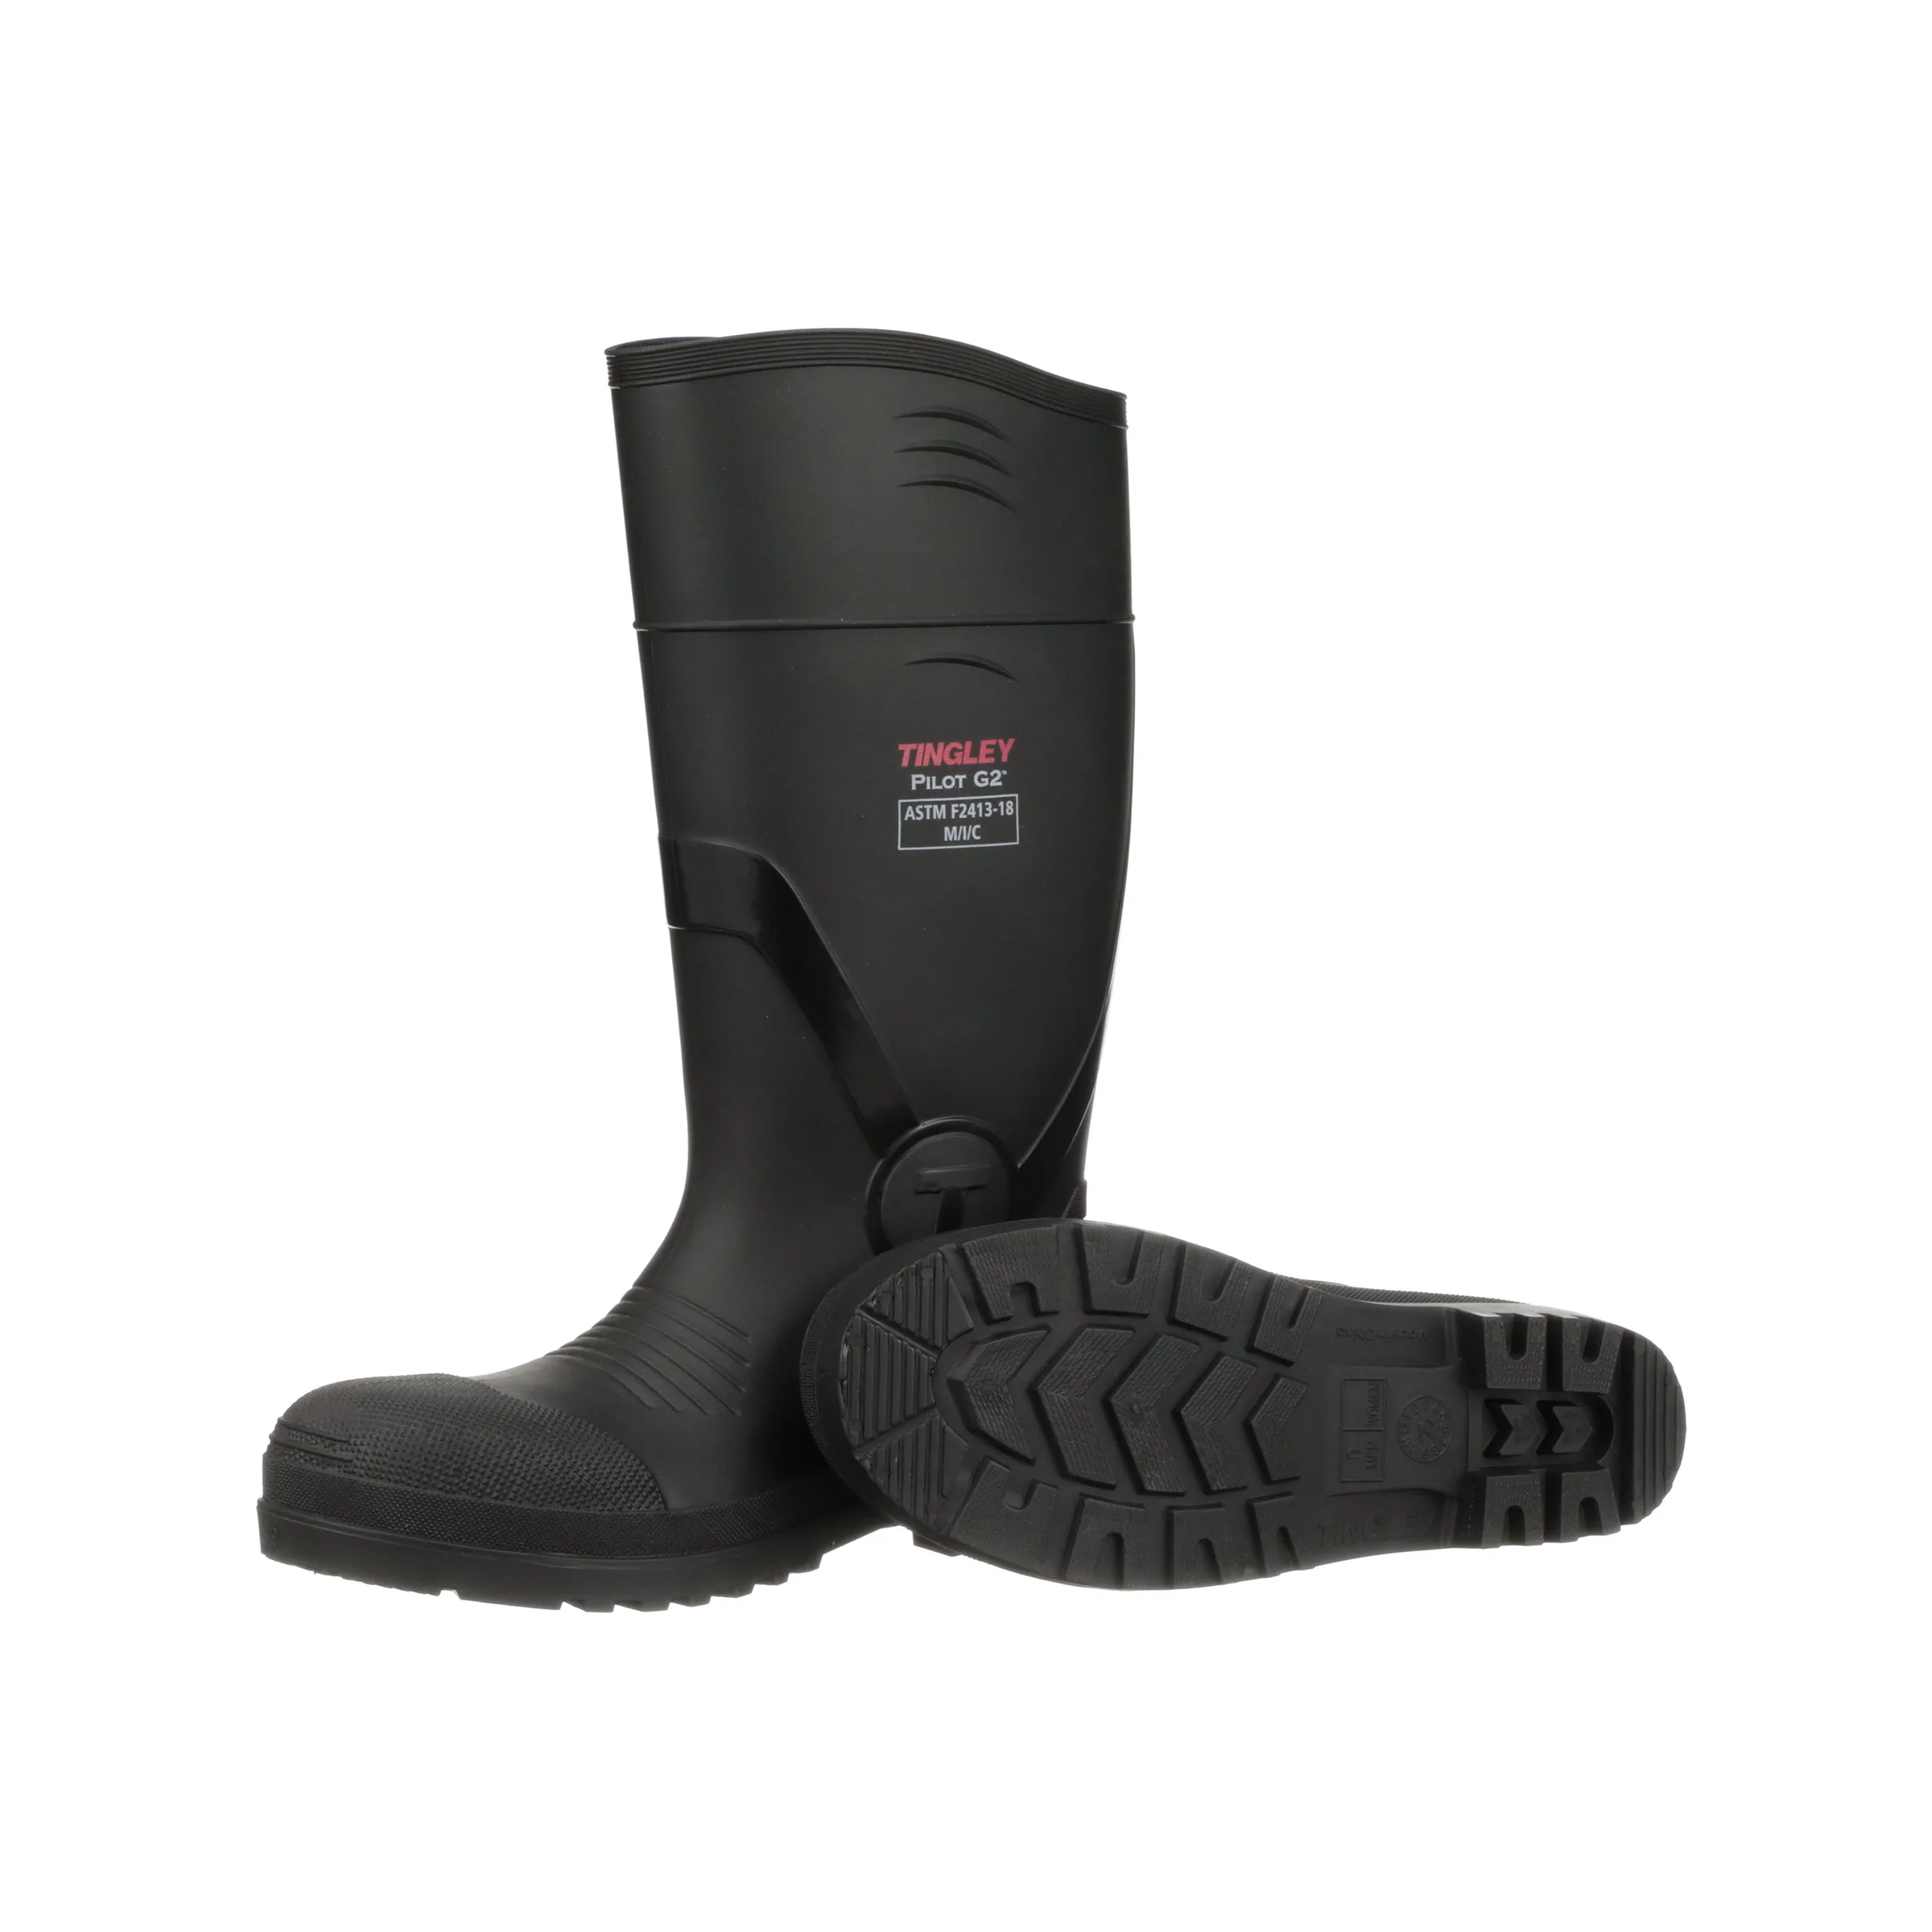 Tingley Pilot G2 15 Inch Knee Rubber Work Boots with Composite Safety Toe from GME Supply